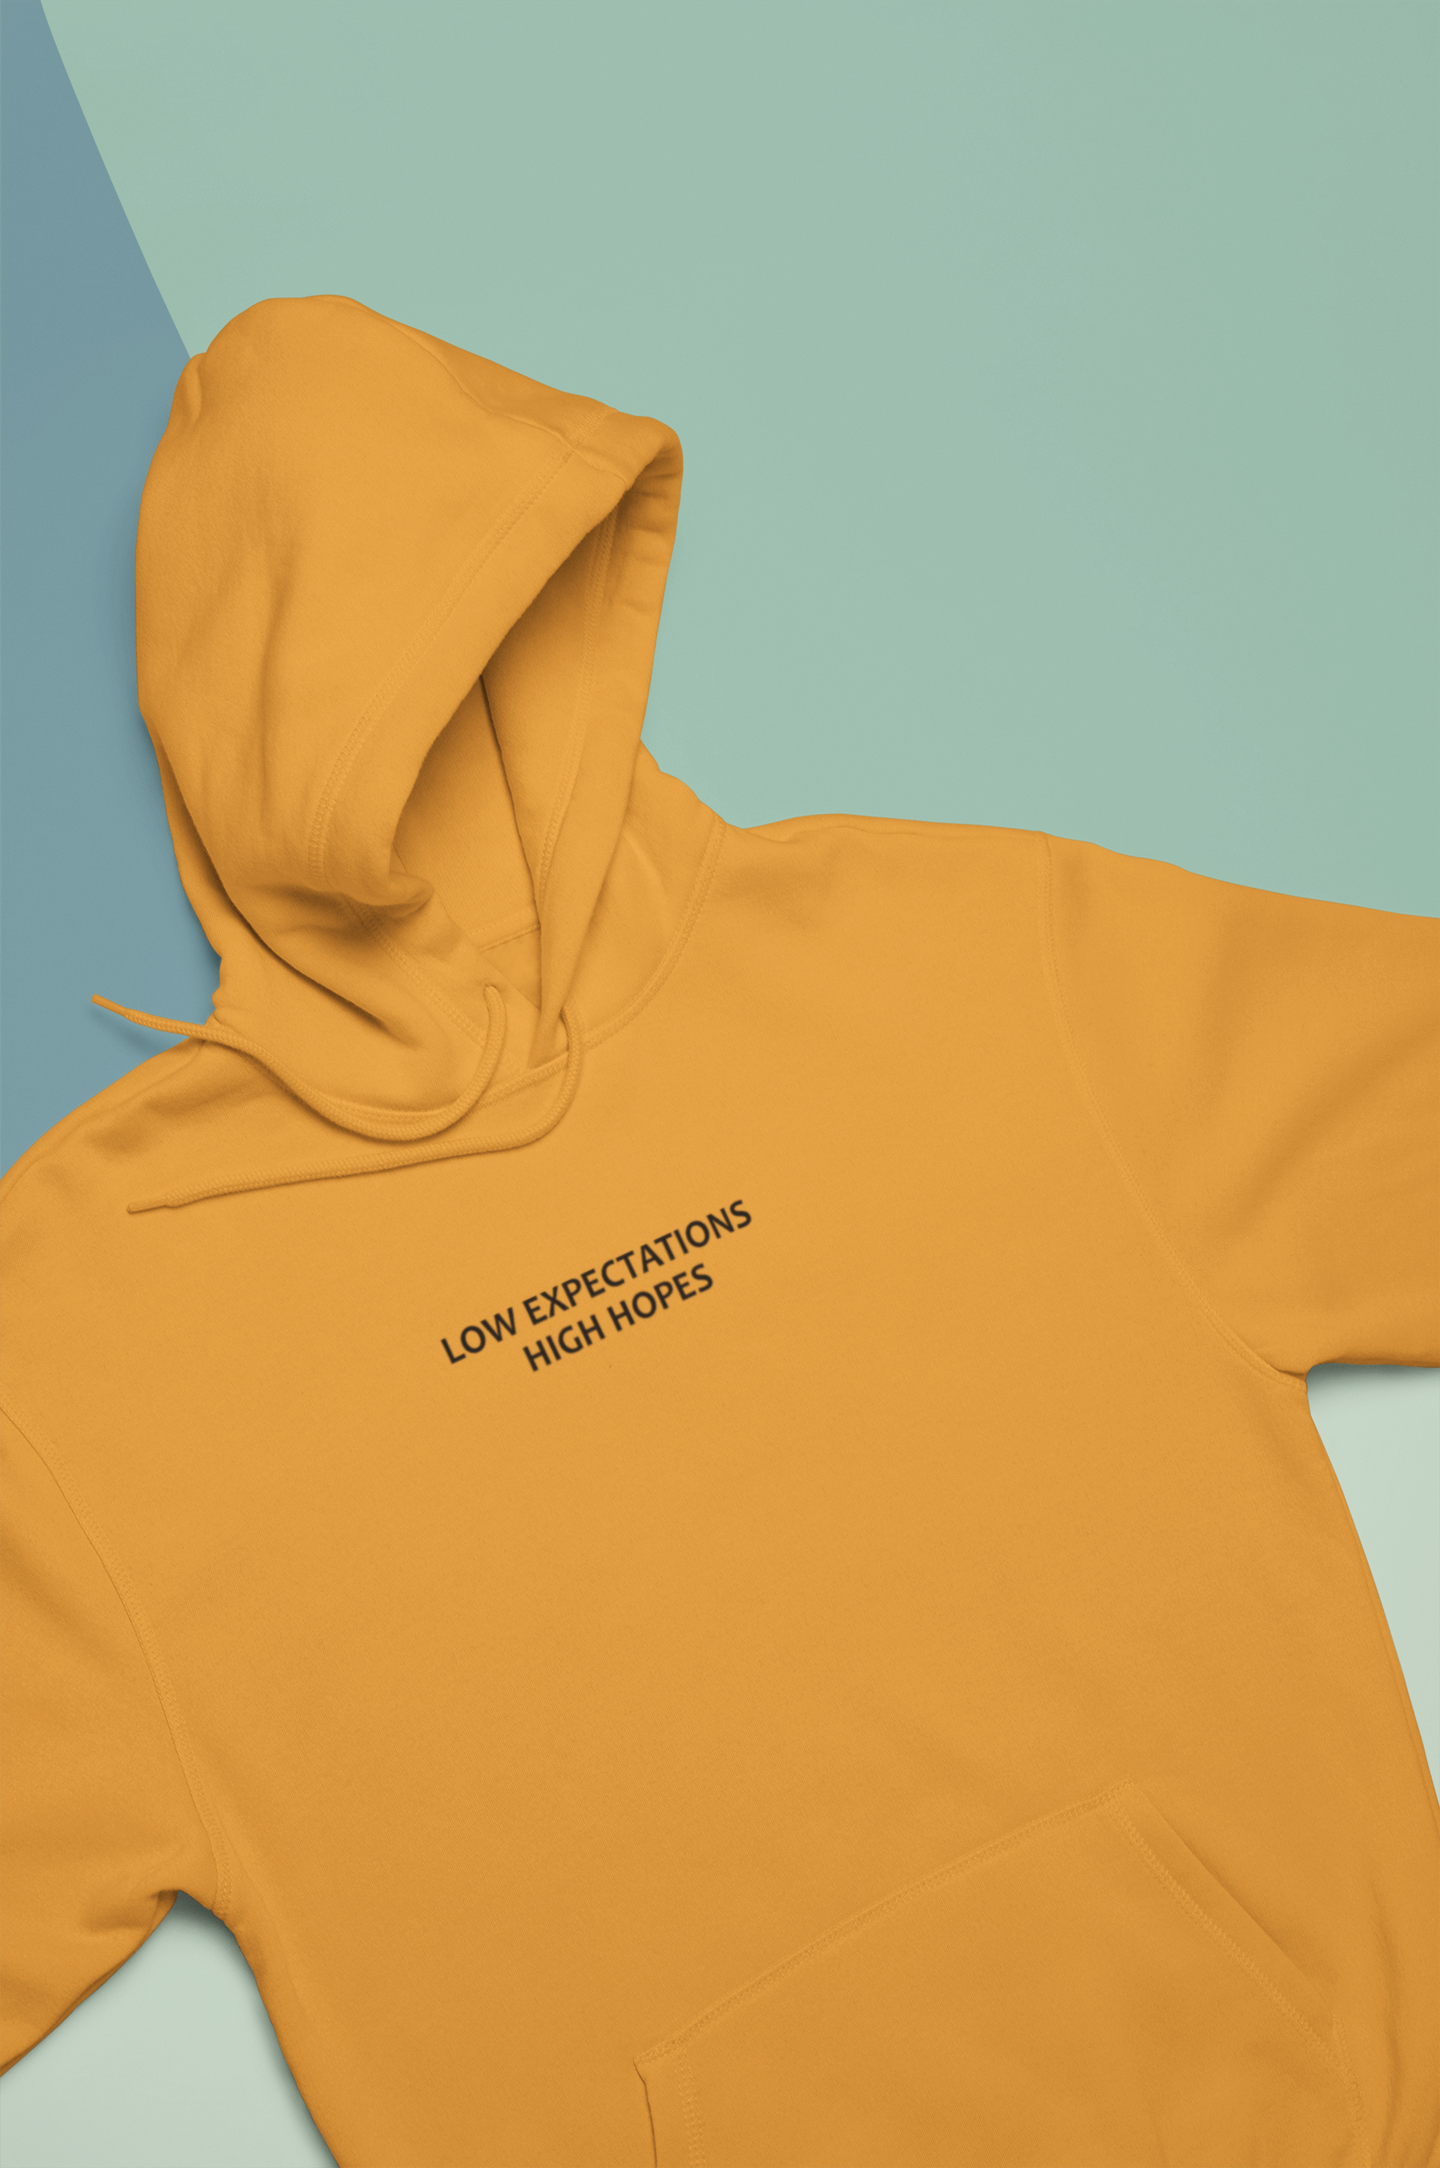 Low Expectations High Hopes Quotes Hoodies for Women-FunkyTeesClub